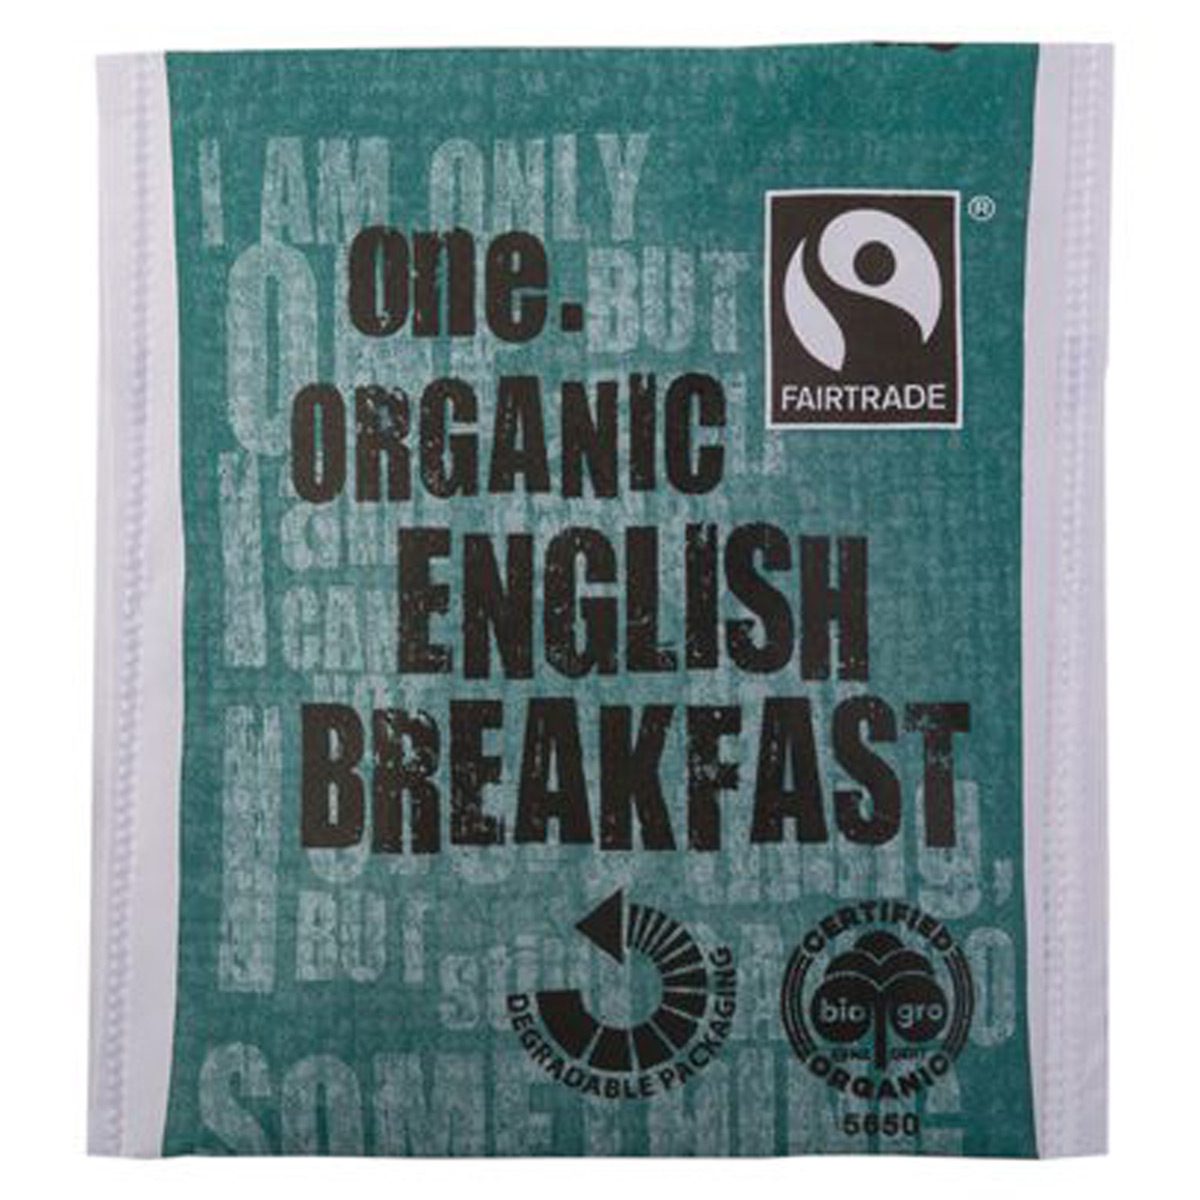 consumables-hospitality-beverage-food-one-fairtrade-english-breakfast-teabags-x200pk-fastest-growing-beverage-brand-fairtrade-strong-vibrant-aroma-seriously-tasty.vjs-distributors-ONETEB